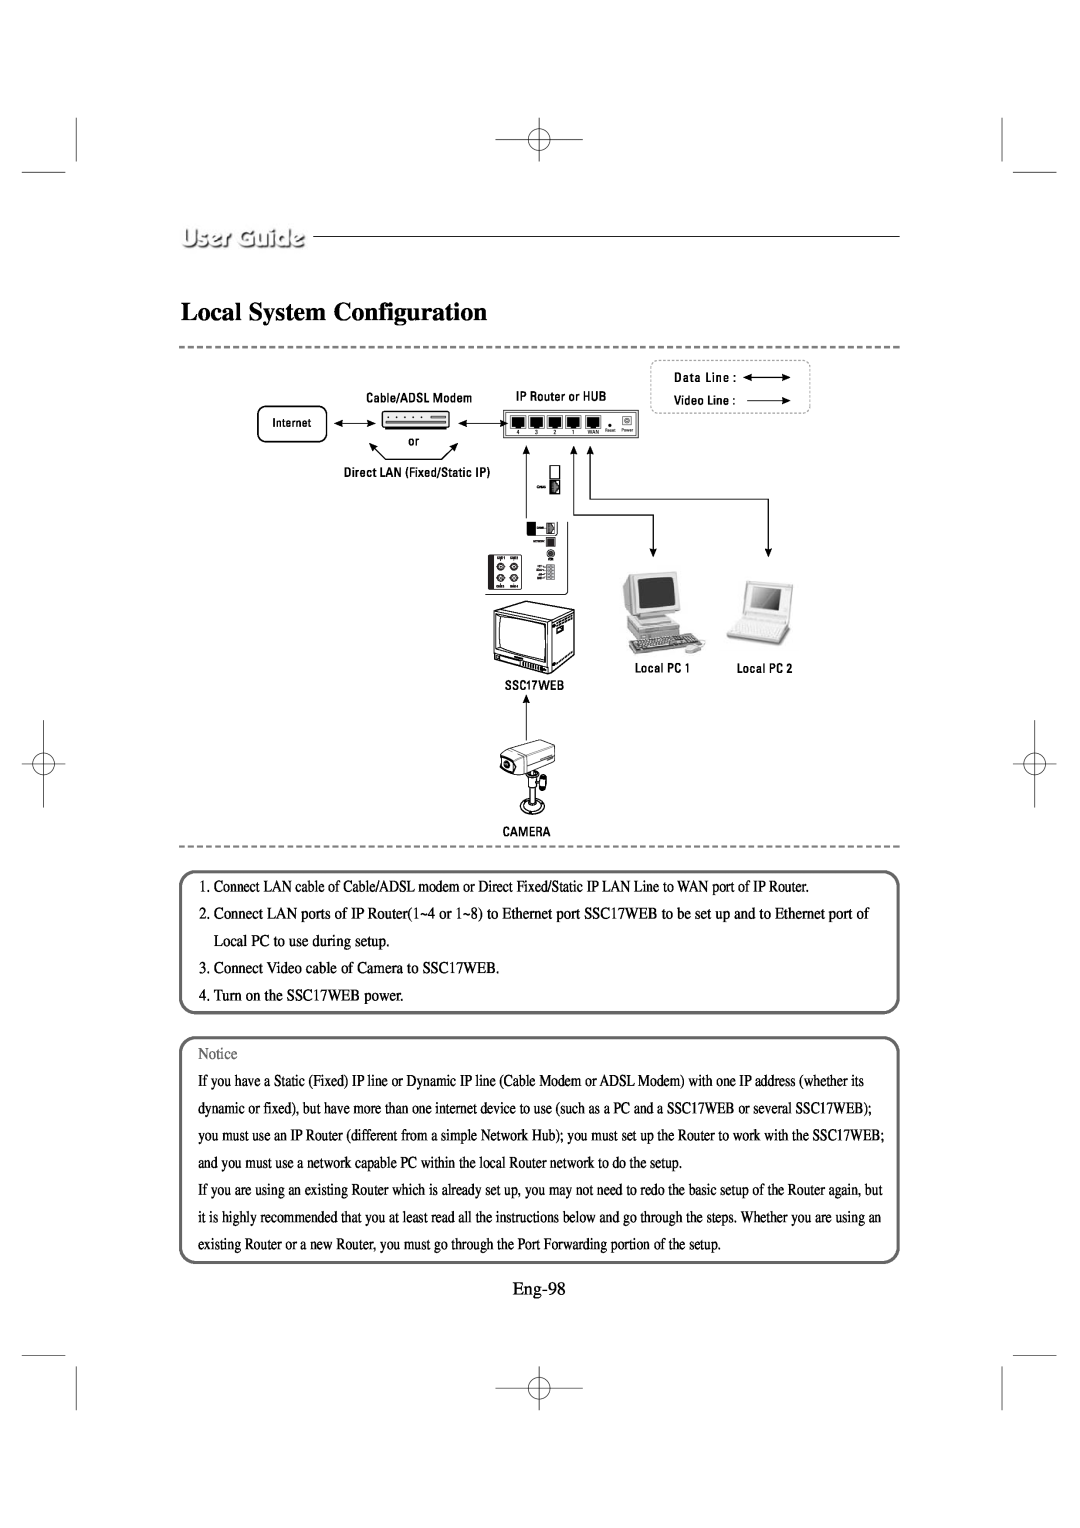 Samsung SSC17WEB manual Local System Configuration, Eng-98 